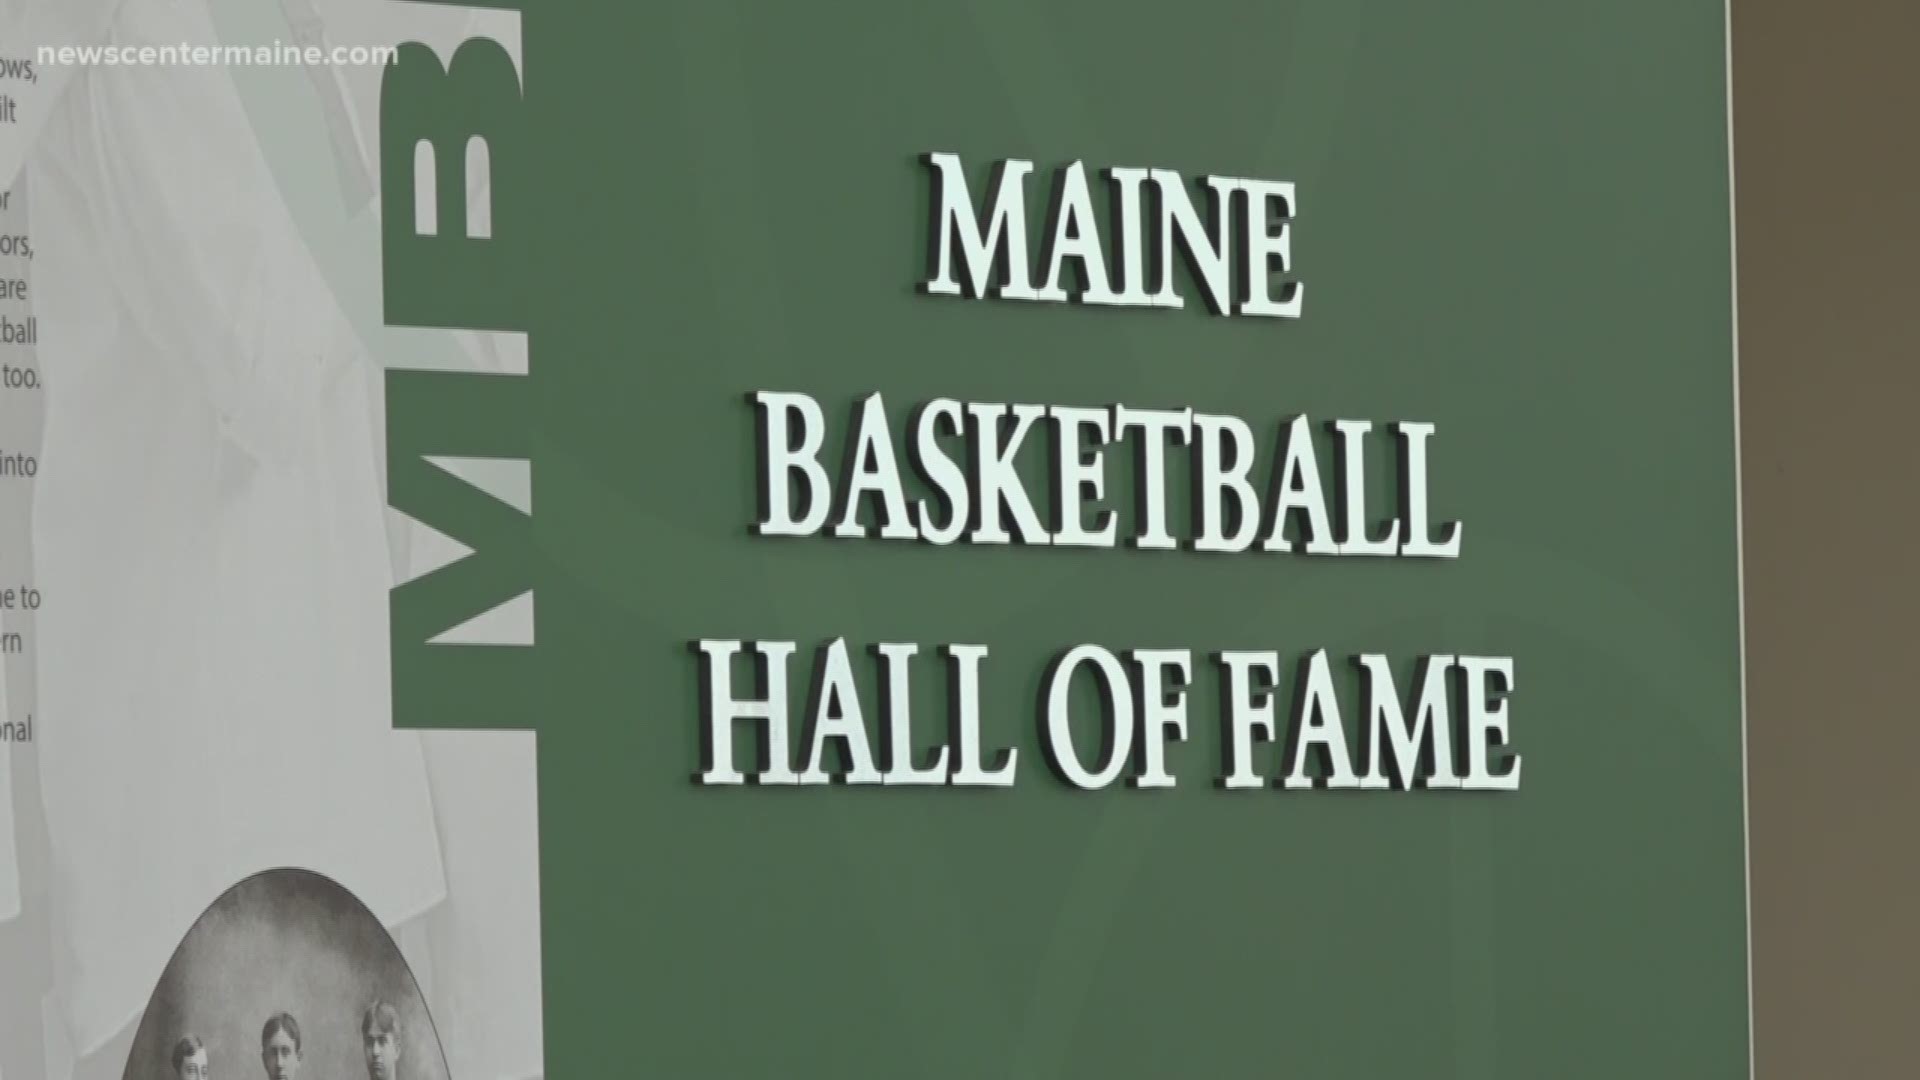 This year's class for the Maine Basketball Hall of Fame included 16 new people.